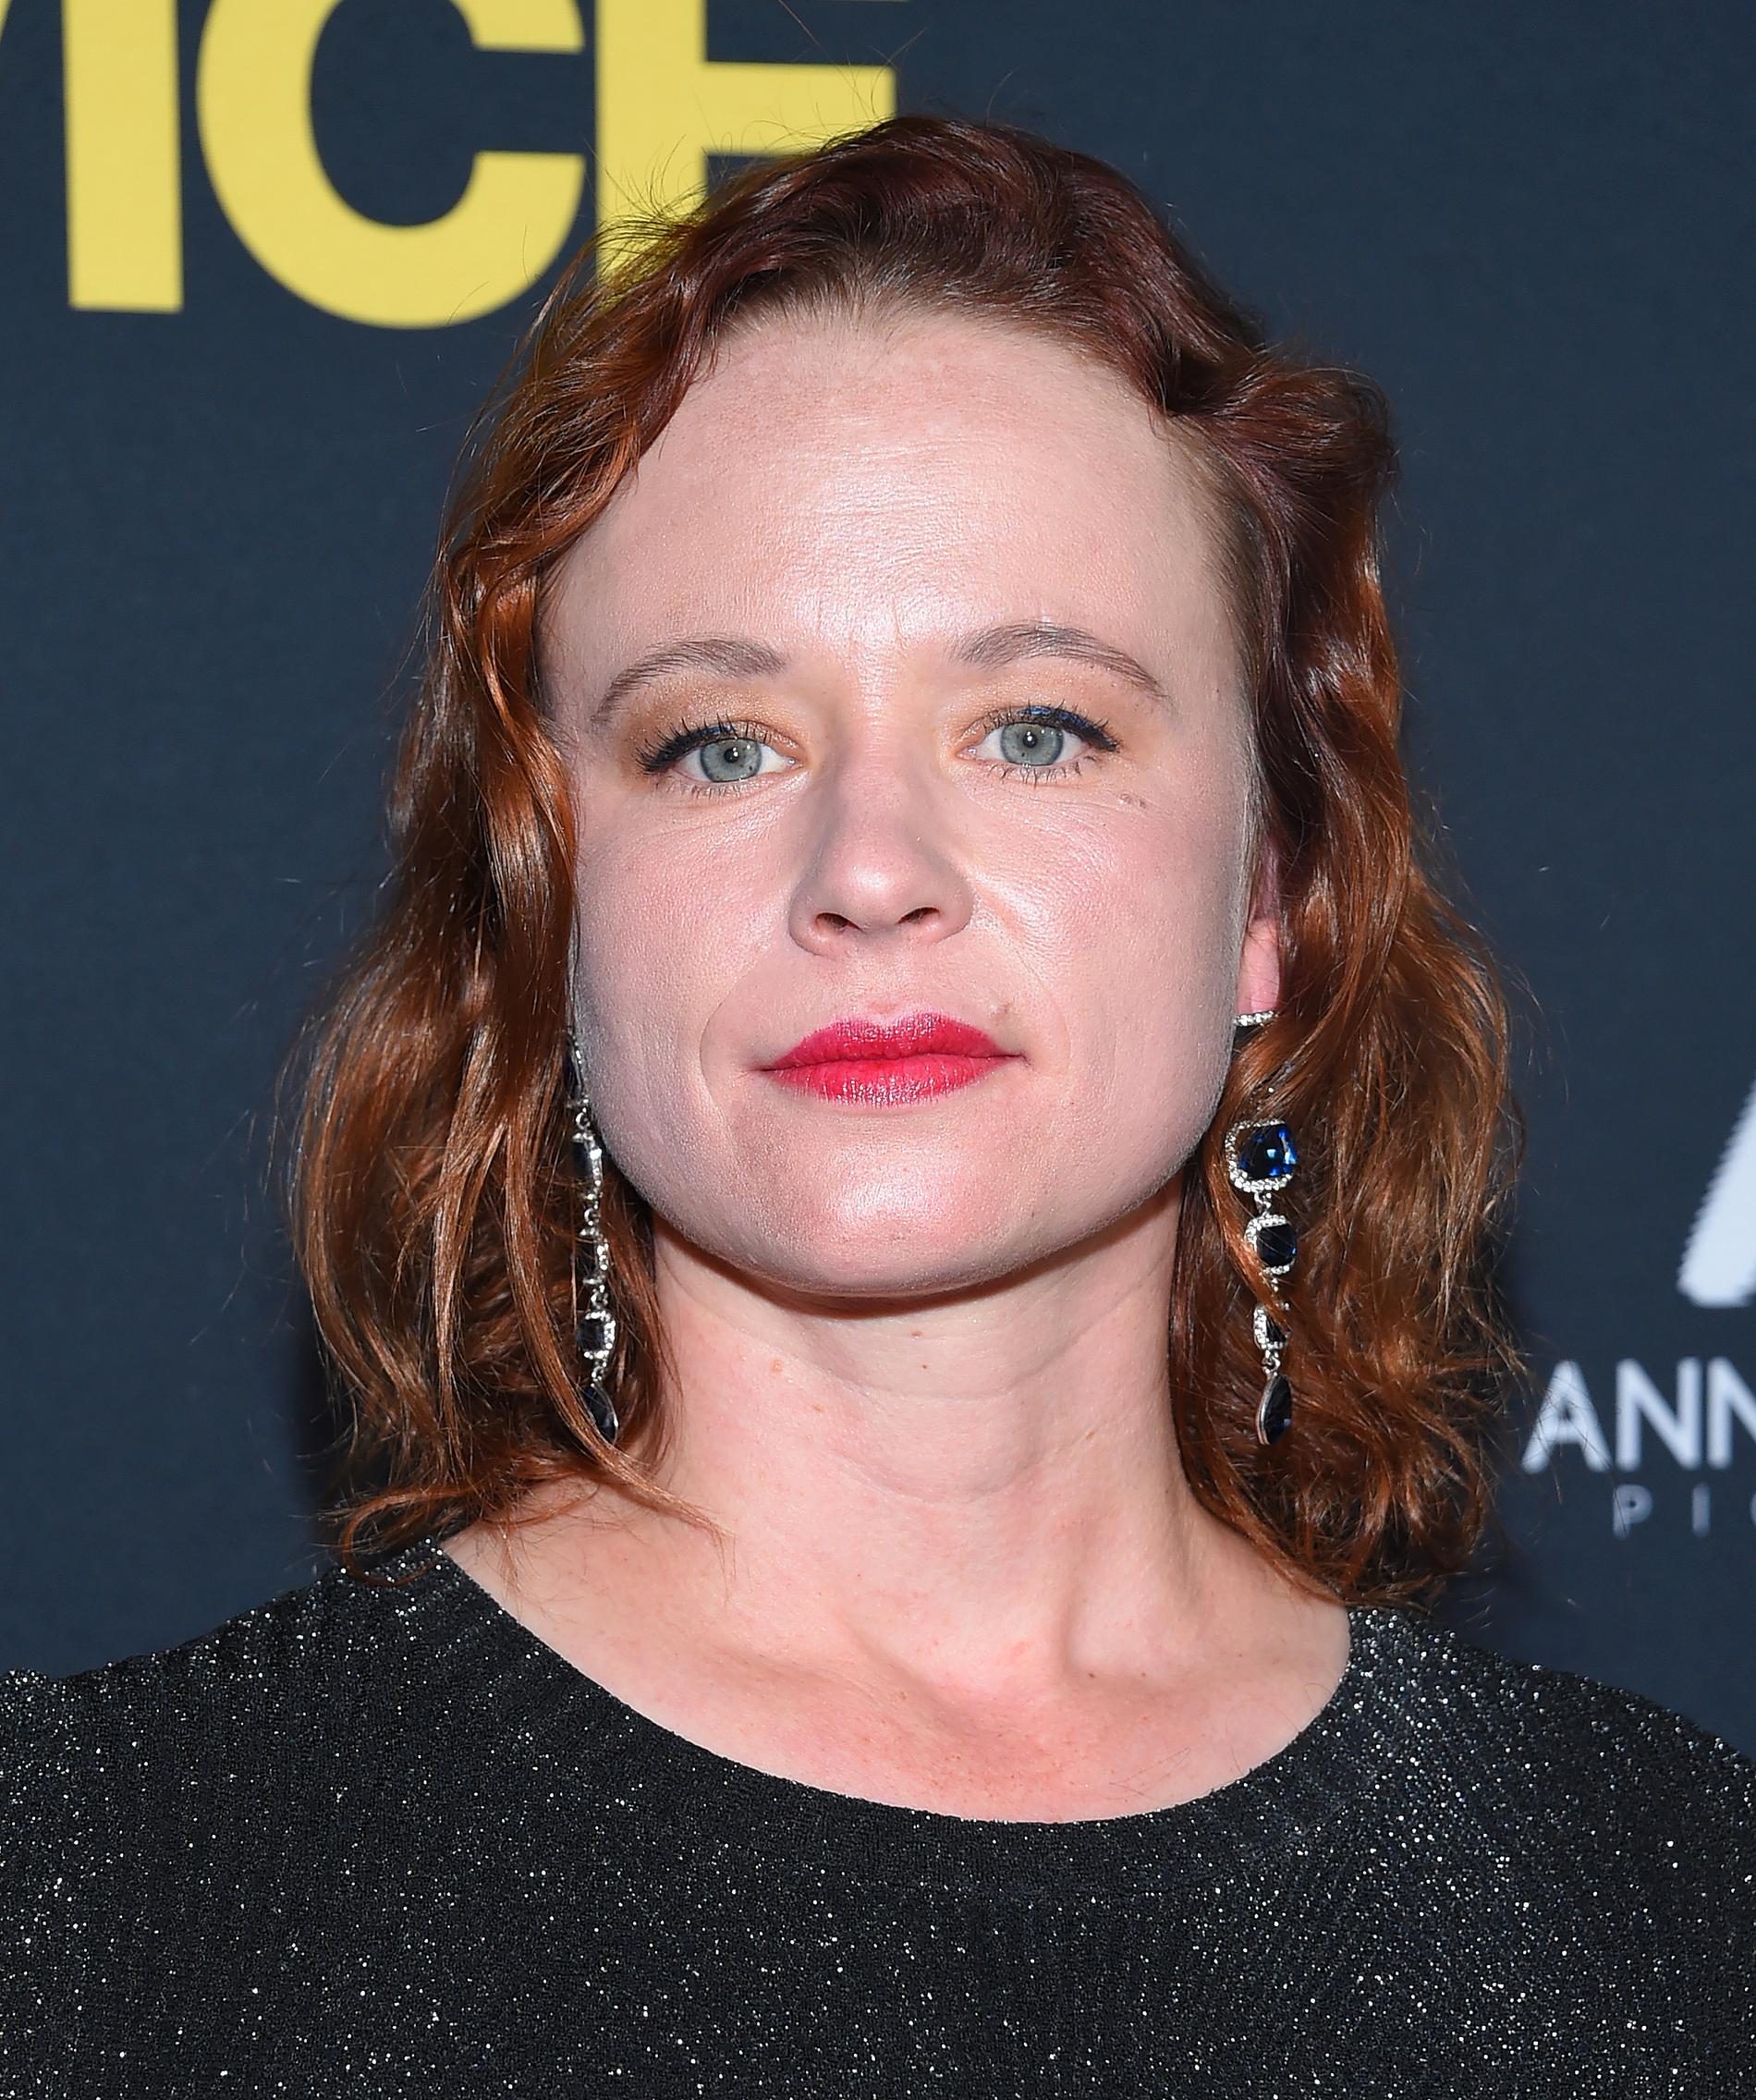 Actress Thora Birch retired from acting in the second season of the series 